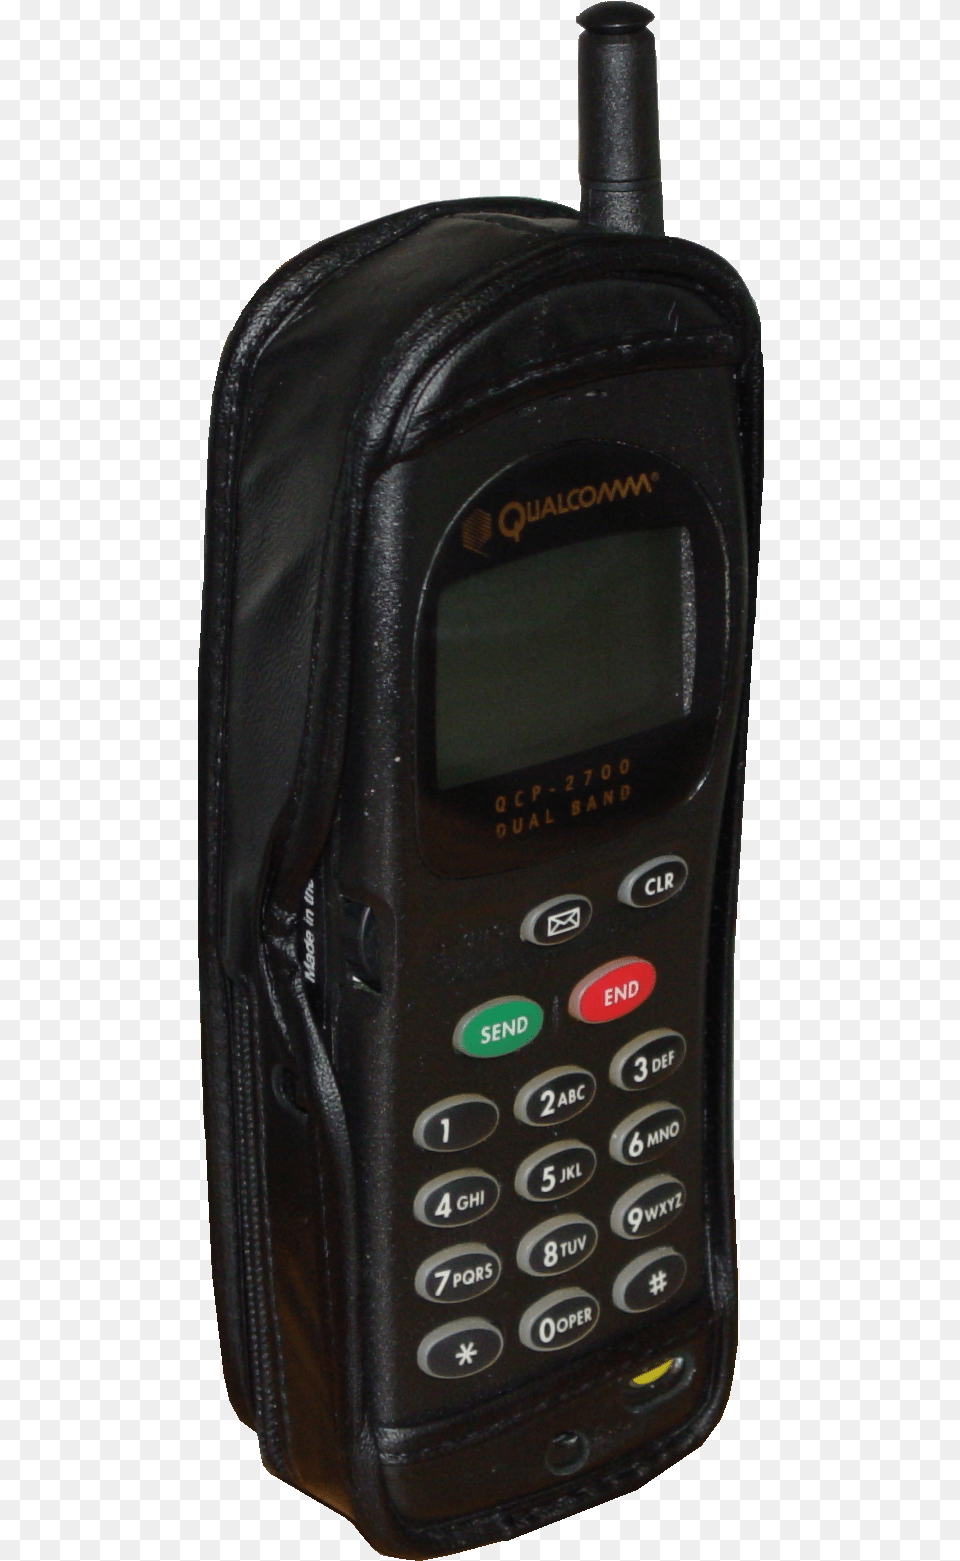 Qualcomm Qcp Cell Phones Now And Then, Electronics, Mobile Phone, Phone Png